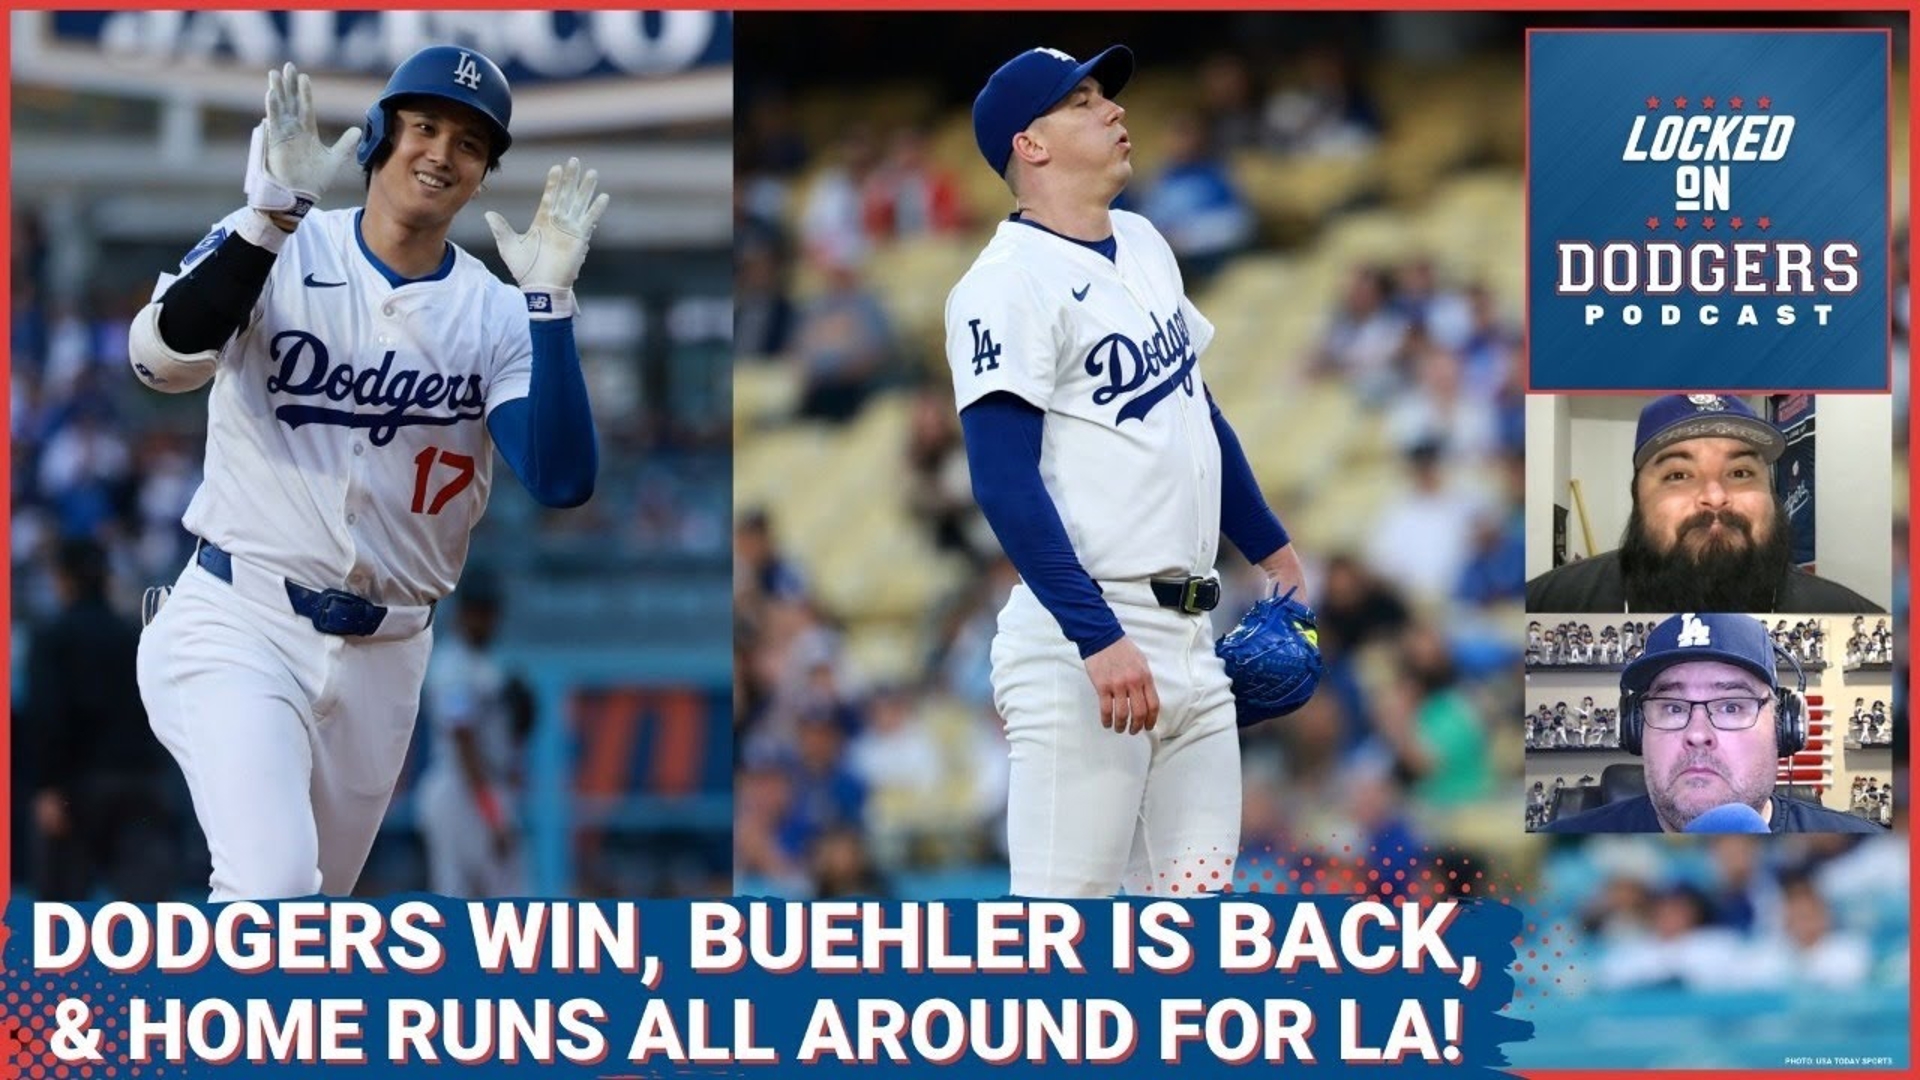 The Los Angeles Dodgers won their fifth straight game and 12th of the last 14, with star pitcher Walker Buehler making his first start in nearly two years.